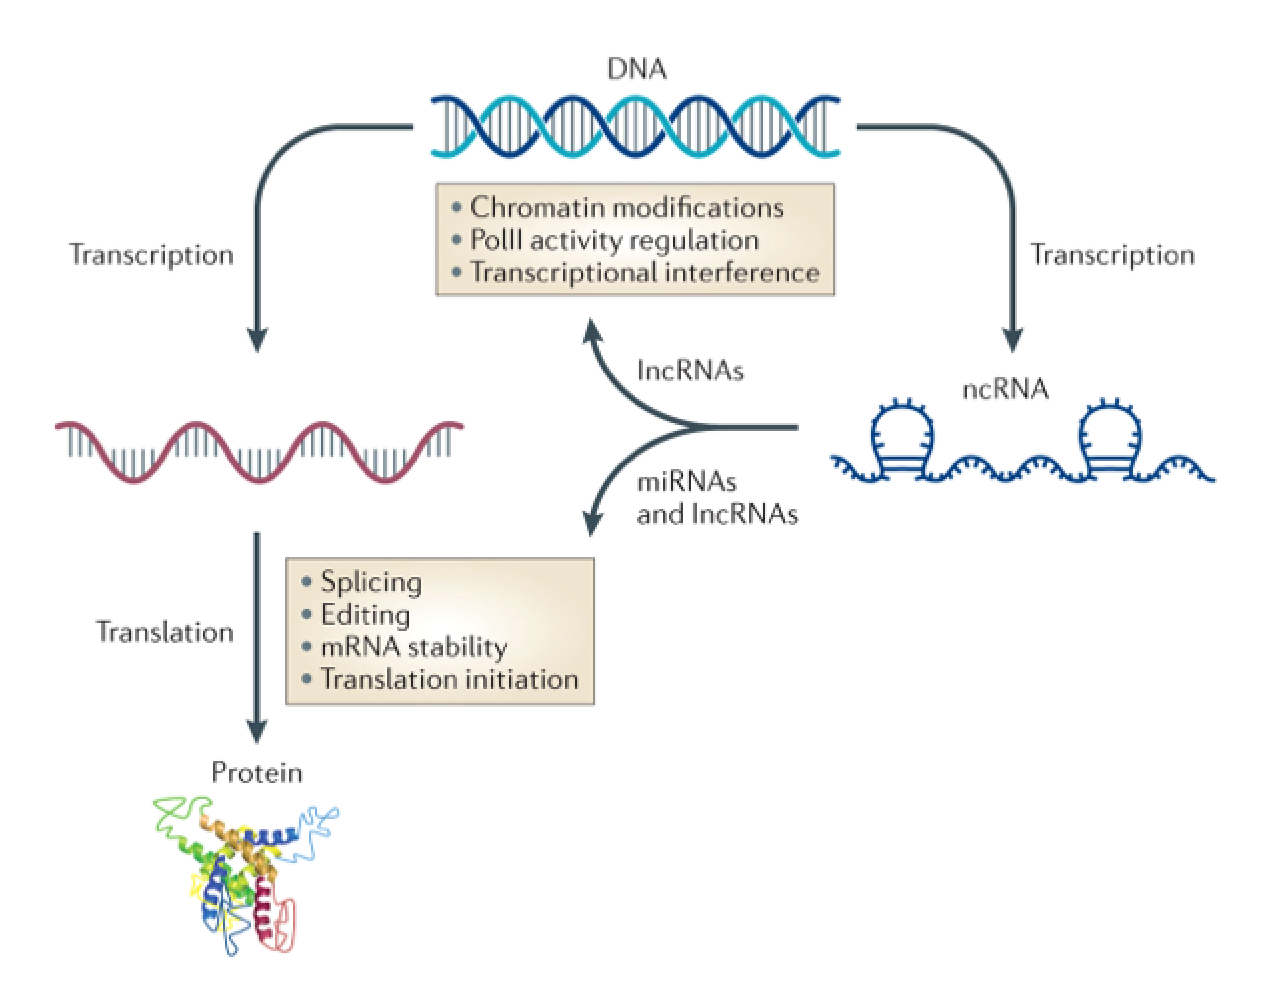 The central dogma and regulatory non-coding RNAs. lncRNA, long non-coding RNA; miRNA, microRNA. (From: Wahlestedt, 2013 Nat Rev Drug Discov)